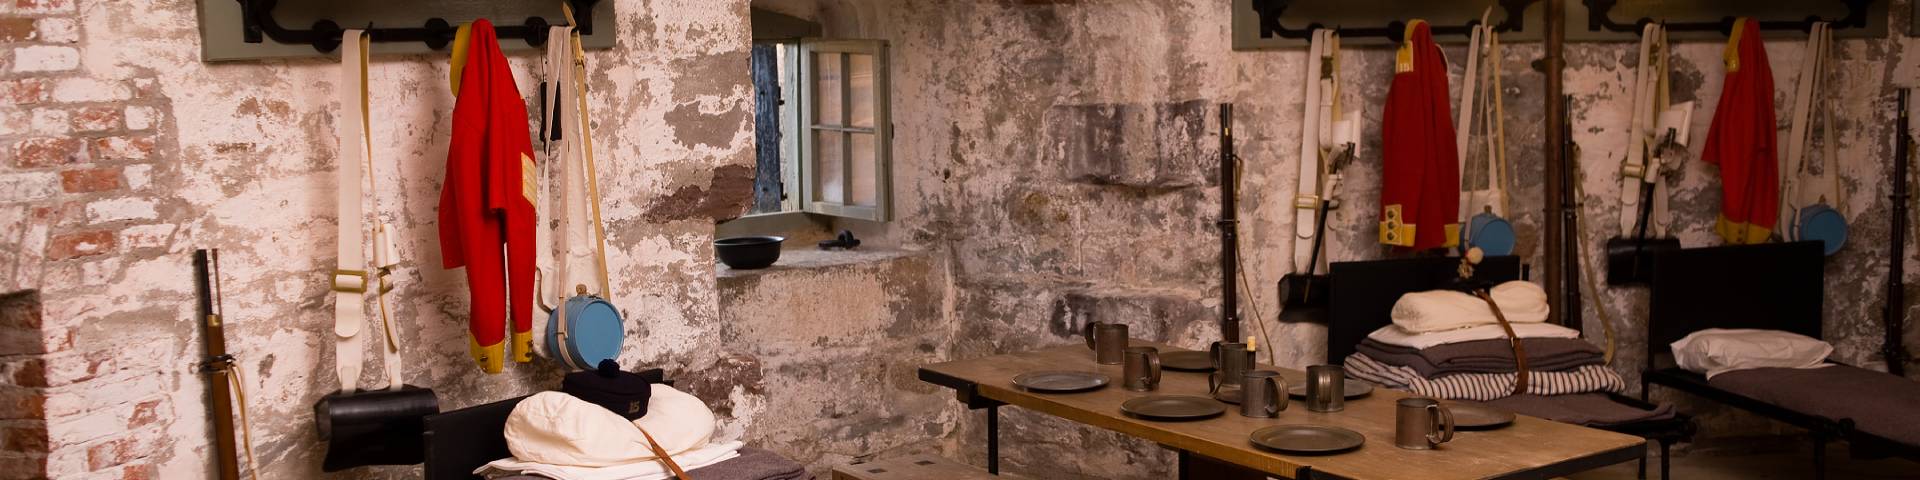 The living quarters of the tower with clothes and beds